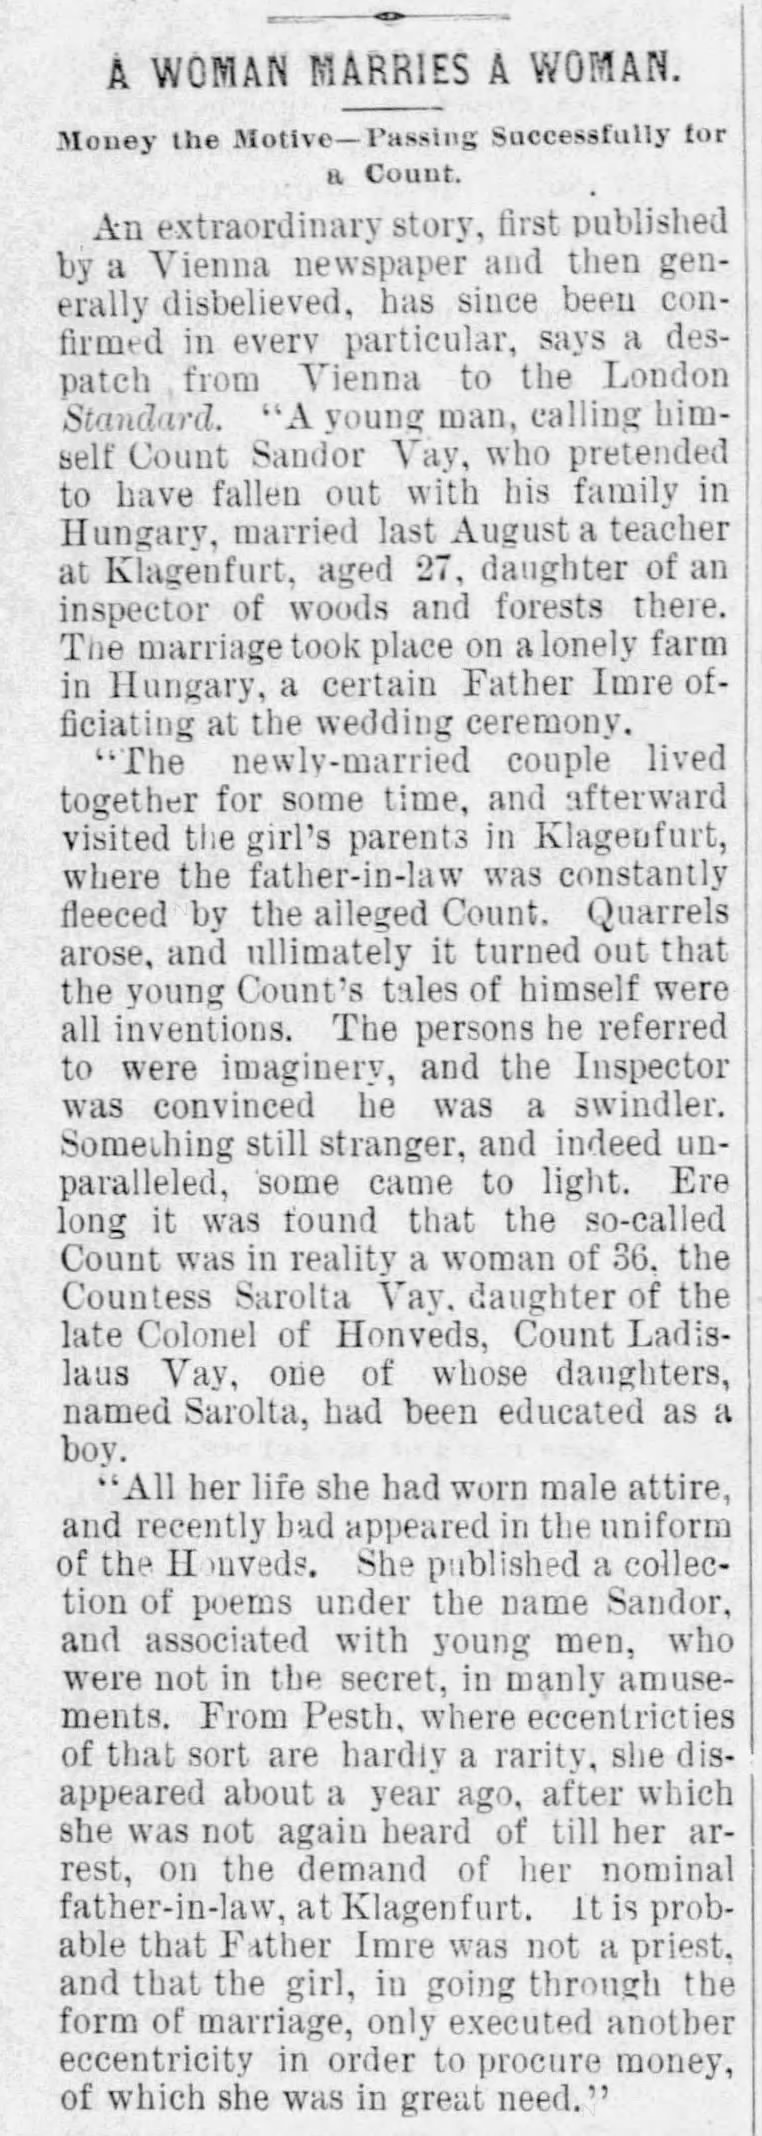 A Woman Marries a Woman. 30 November 1889. Lancaster, Pennsylvania: The Inquirer. p. 2